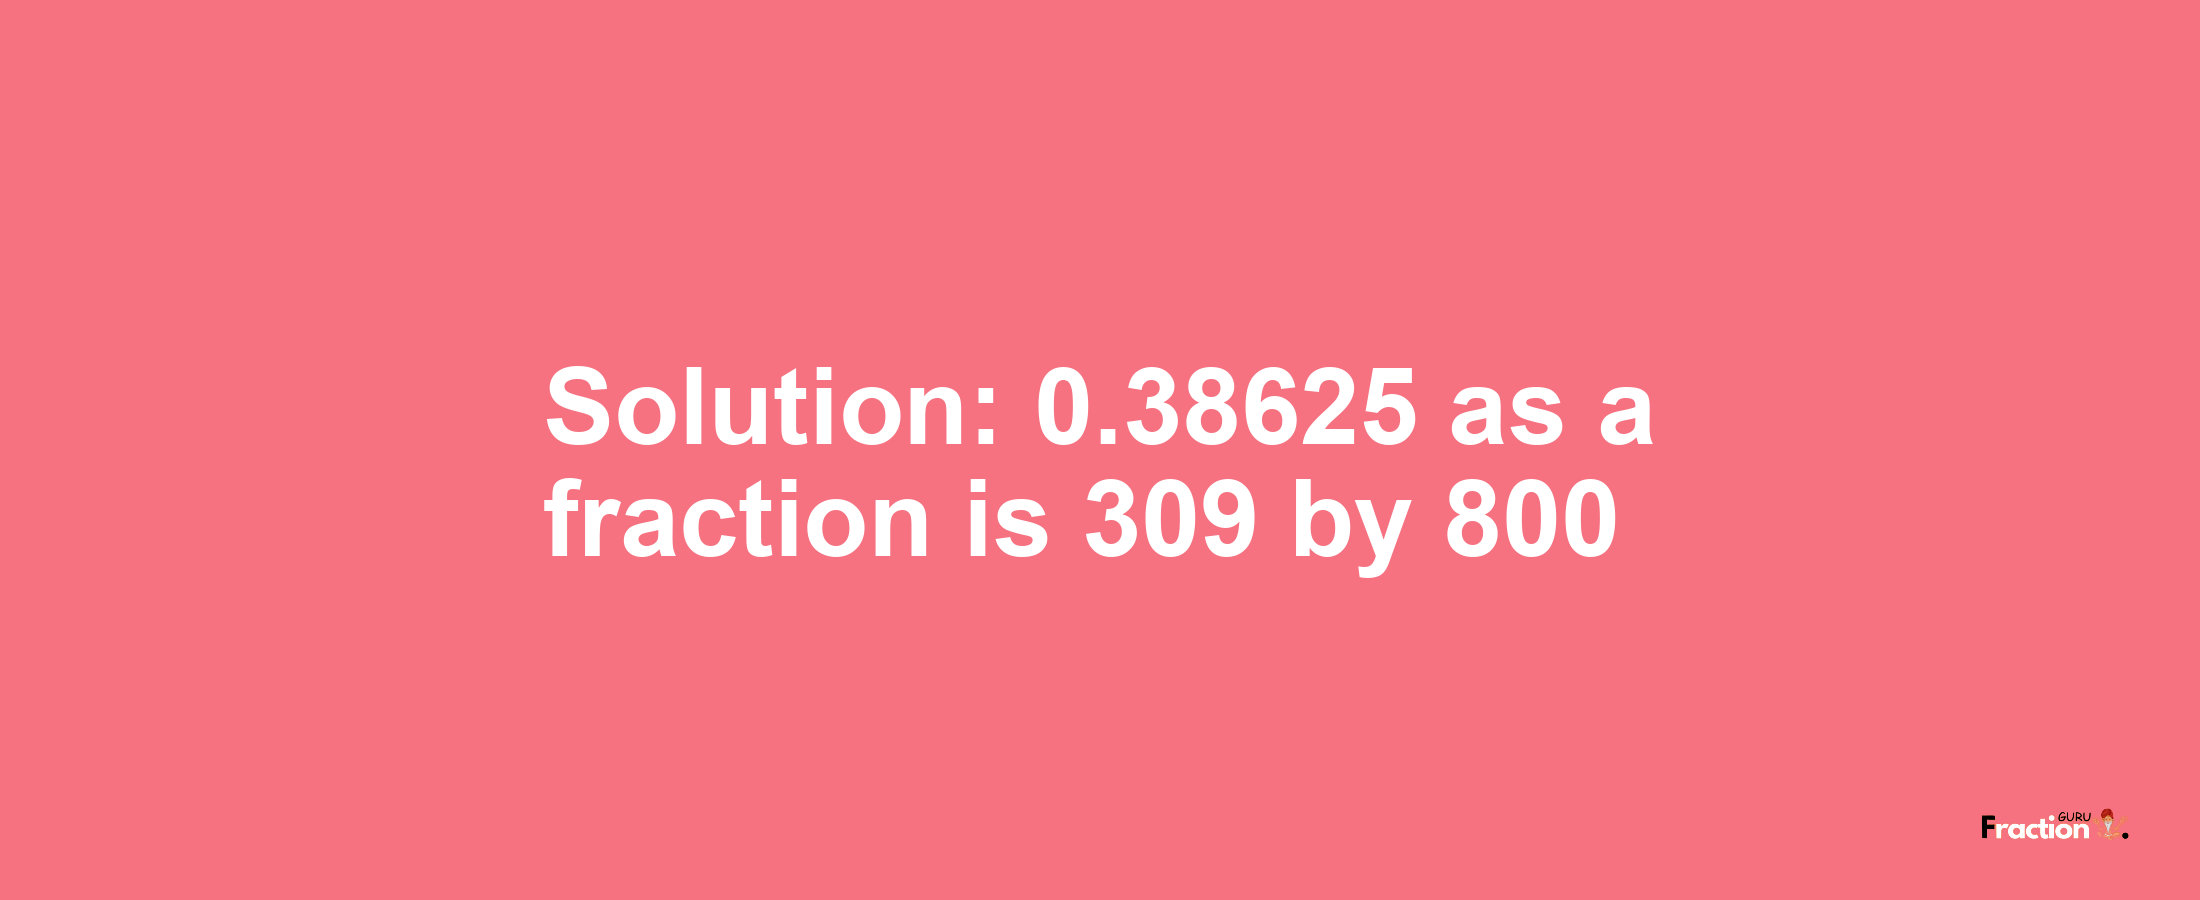 Solution:0.38625 as a fraction is 309/800